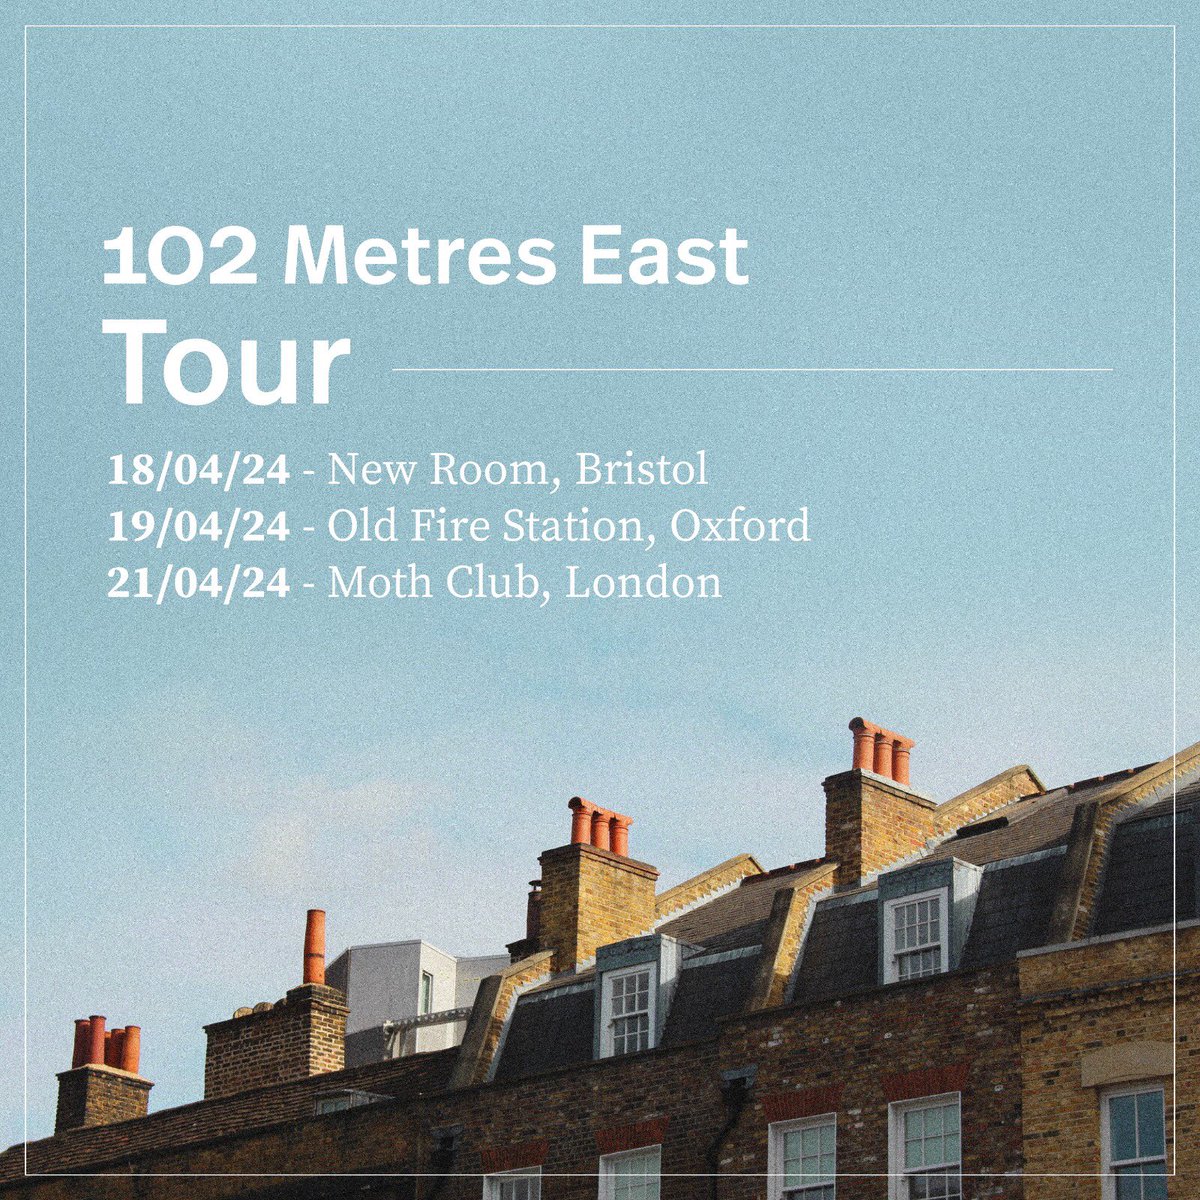 Tickets available now at www.spaffordcampbell/live These shows will be celebrating the release of our new EP ‘102 Metres East’ coming out on soon on Real World X.